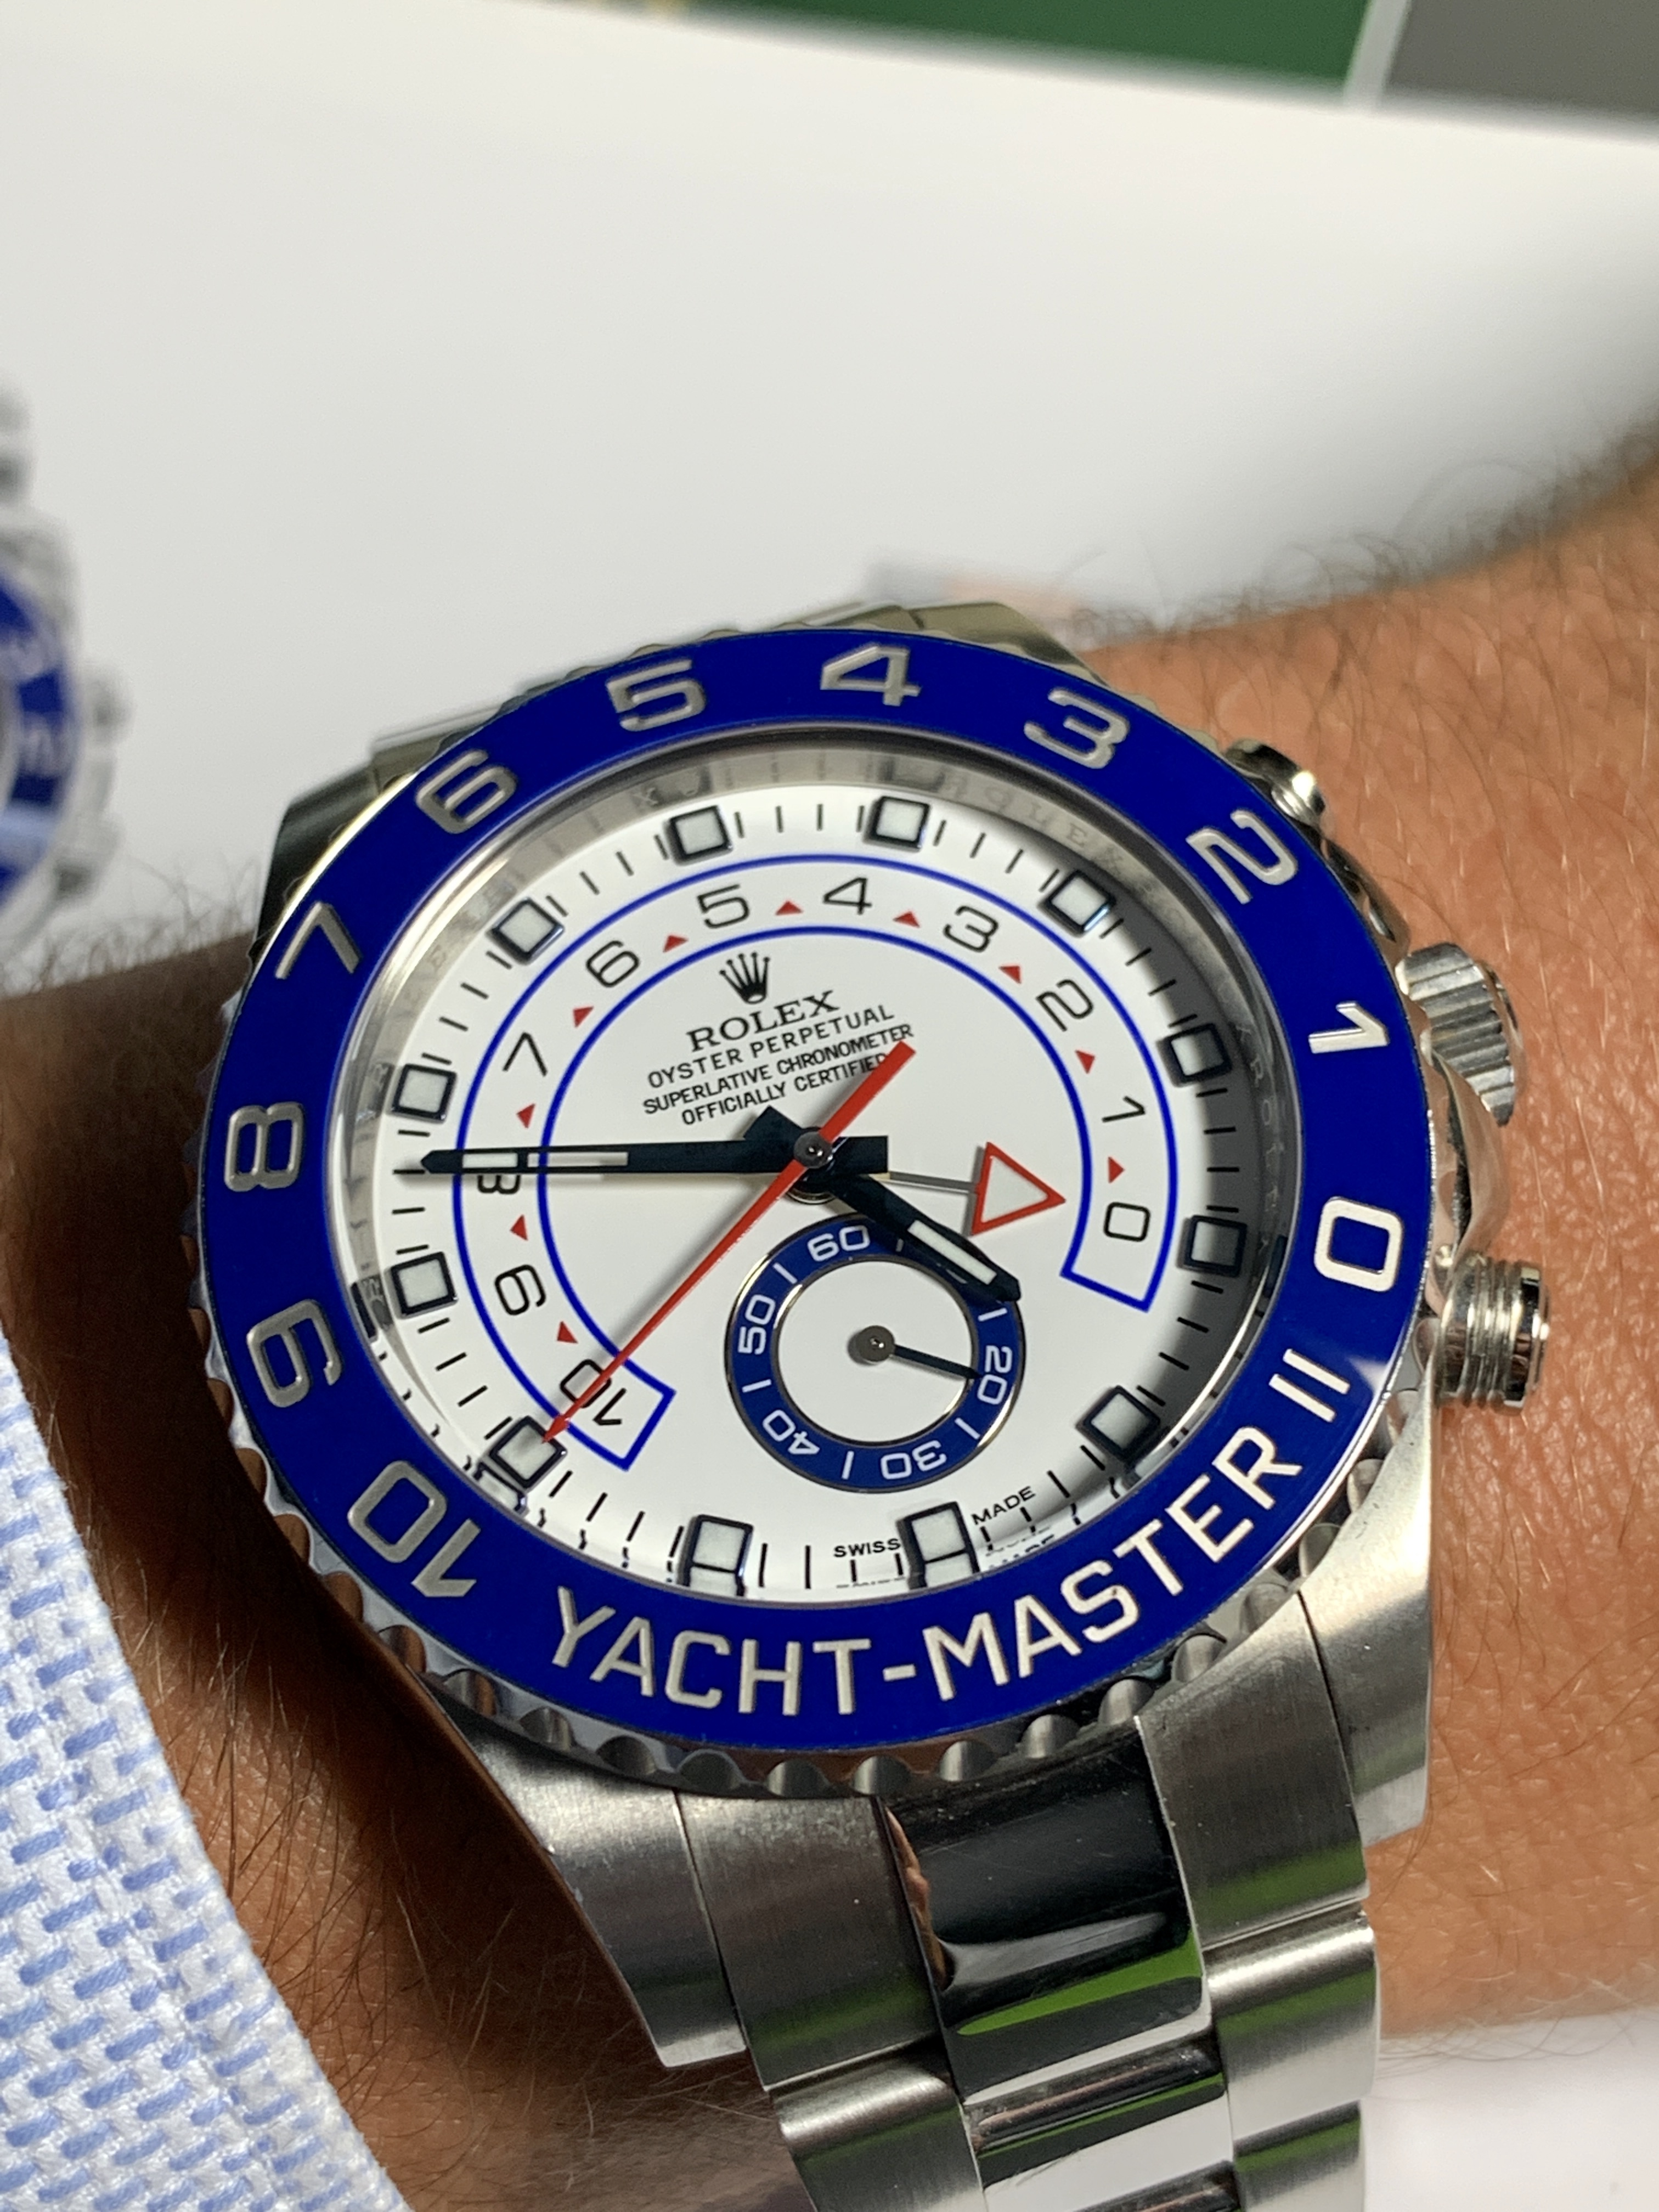 yachtmaster 2 leather strap